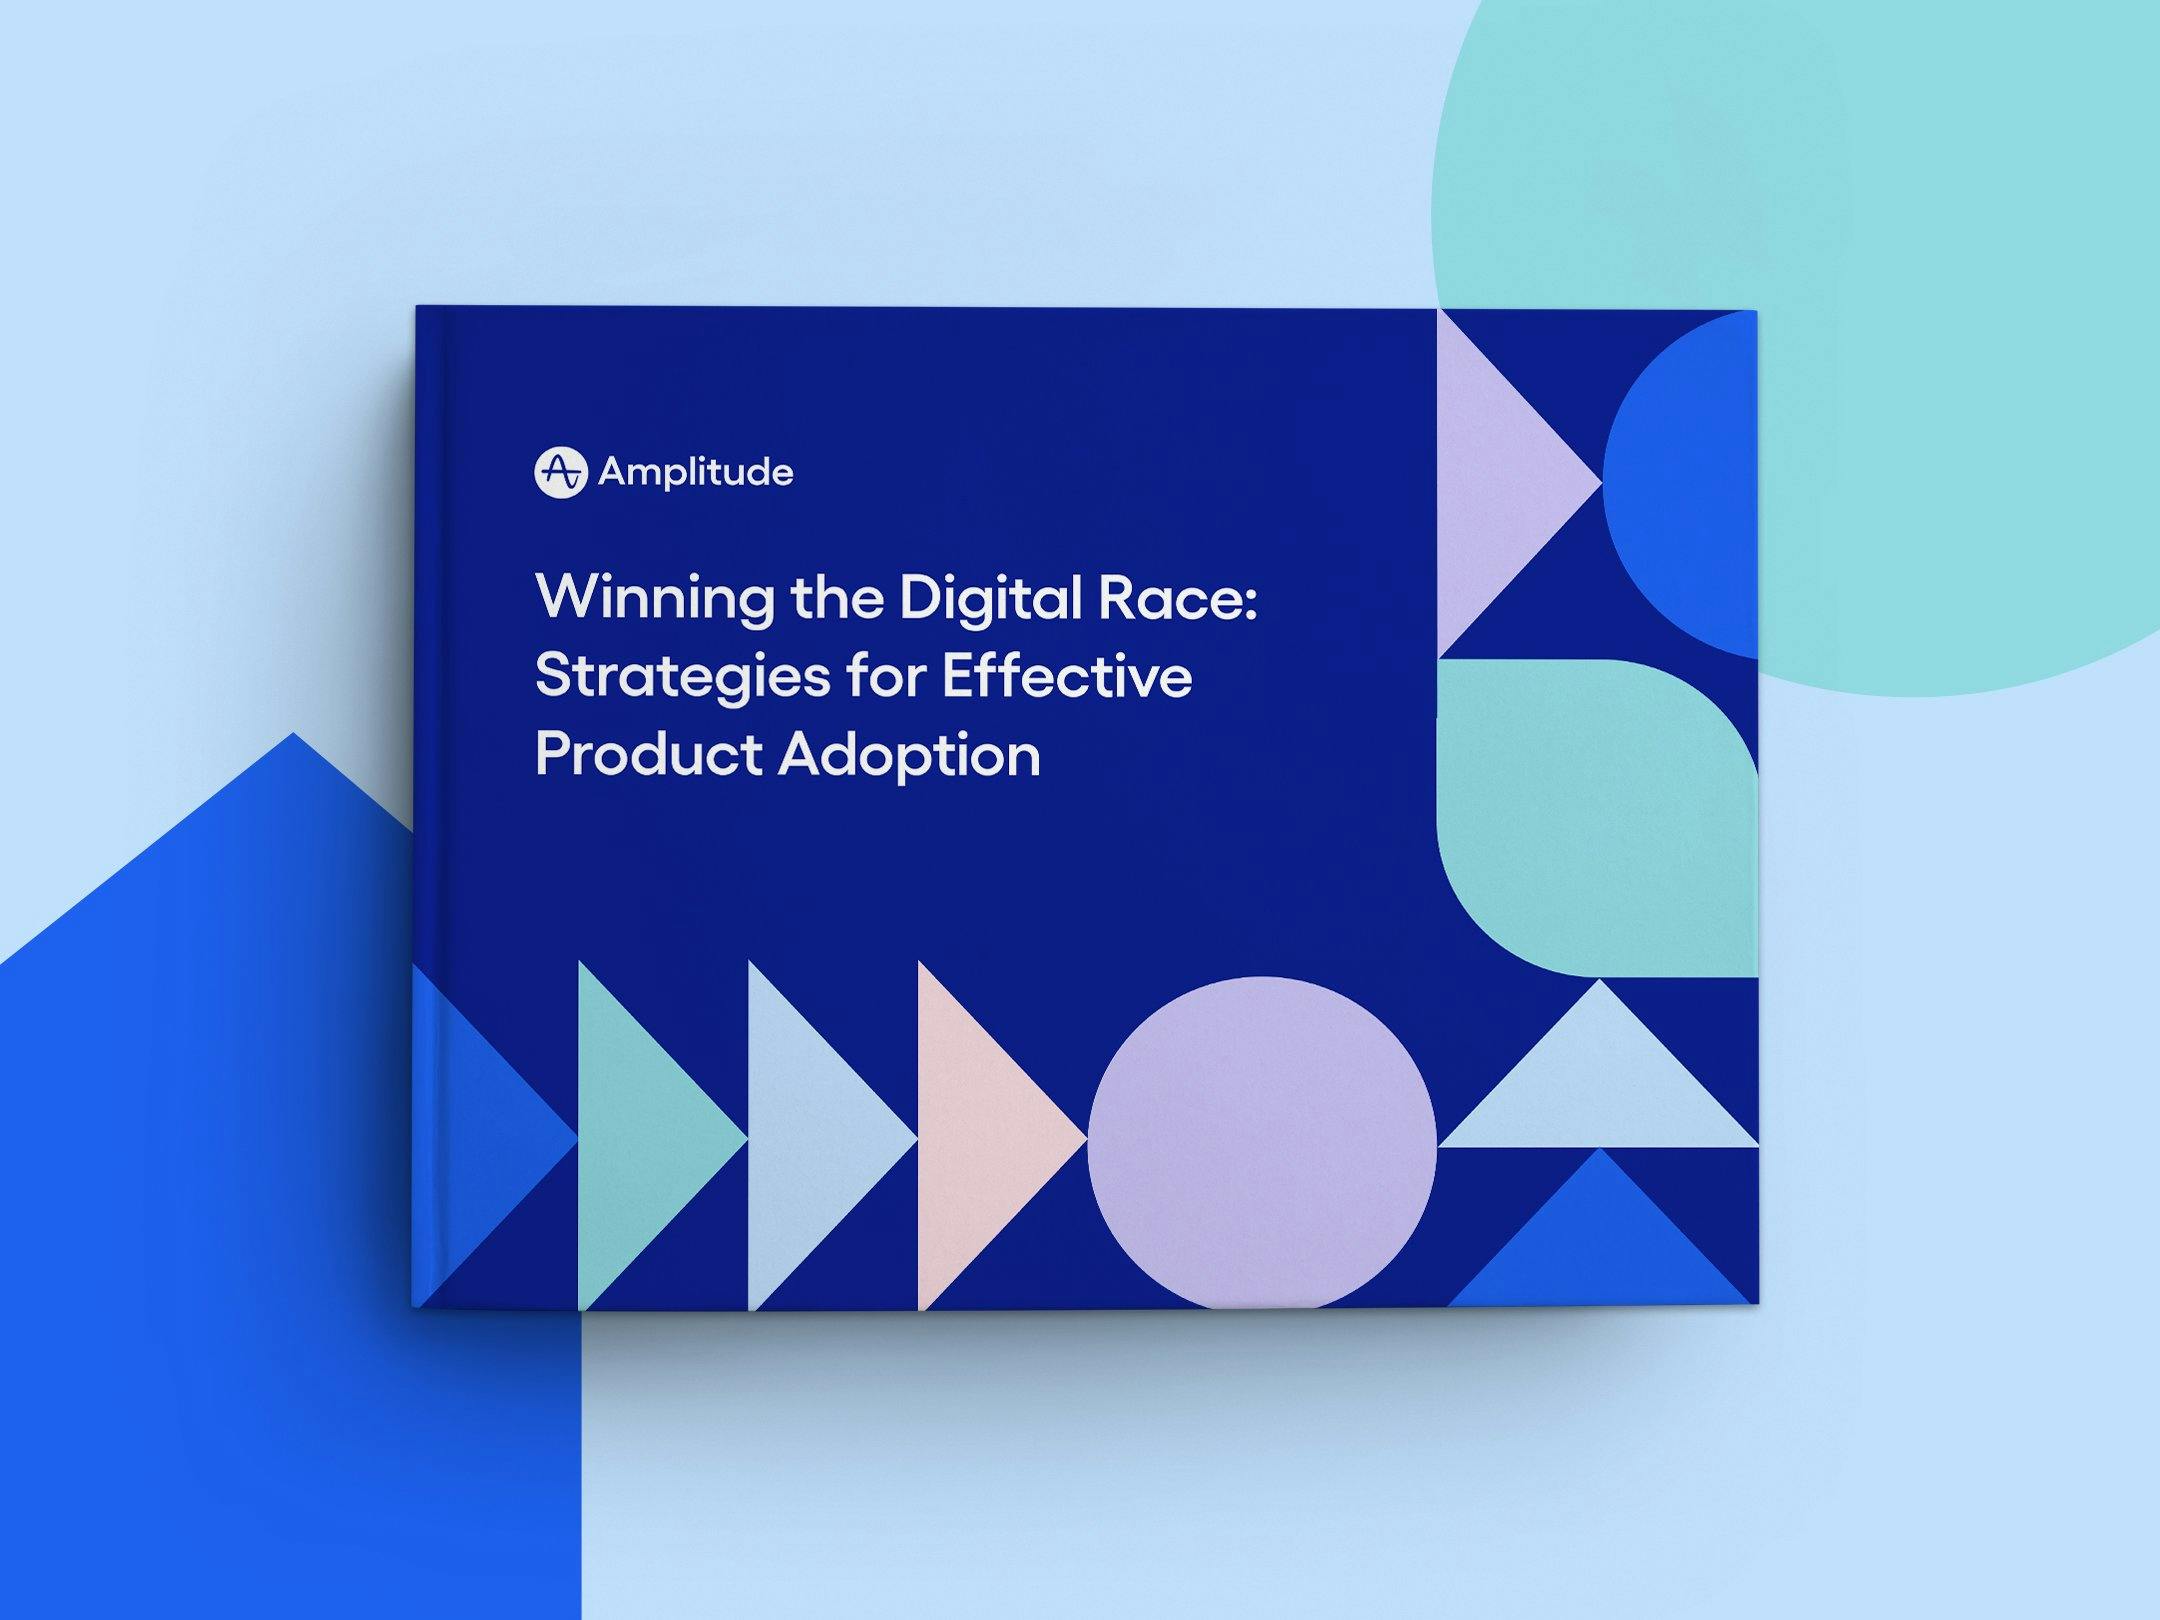 Strategies for Effective Digital Product Adoption